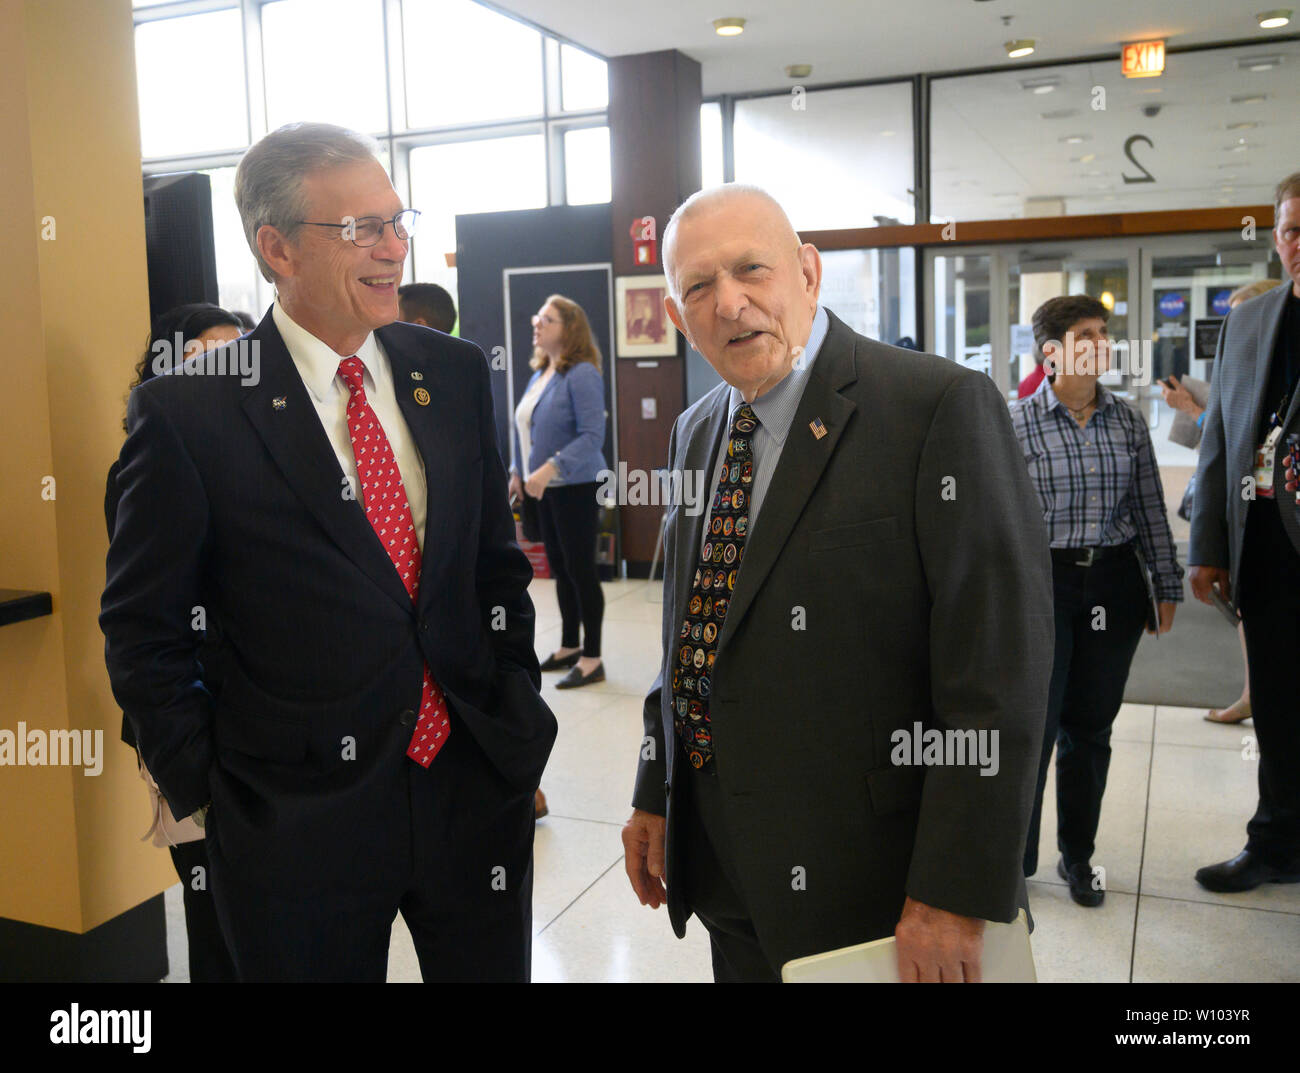 Retired Apollo 11 Flight Director Gene Kranz, right, walks with Texas Congressman Dr. Brian Babin as dignitaries gather in the restored Mission Control at NASA outside Houston to dedicate its restoration in honor of the 50th anniversary of Apollo 11's 1969 moon landing. Stock Photo